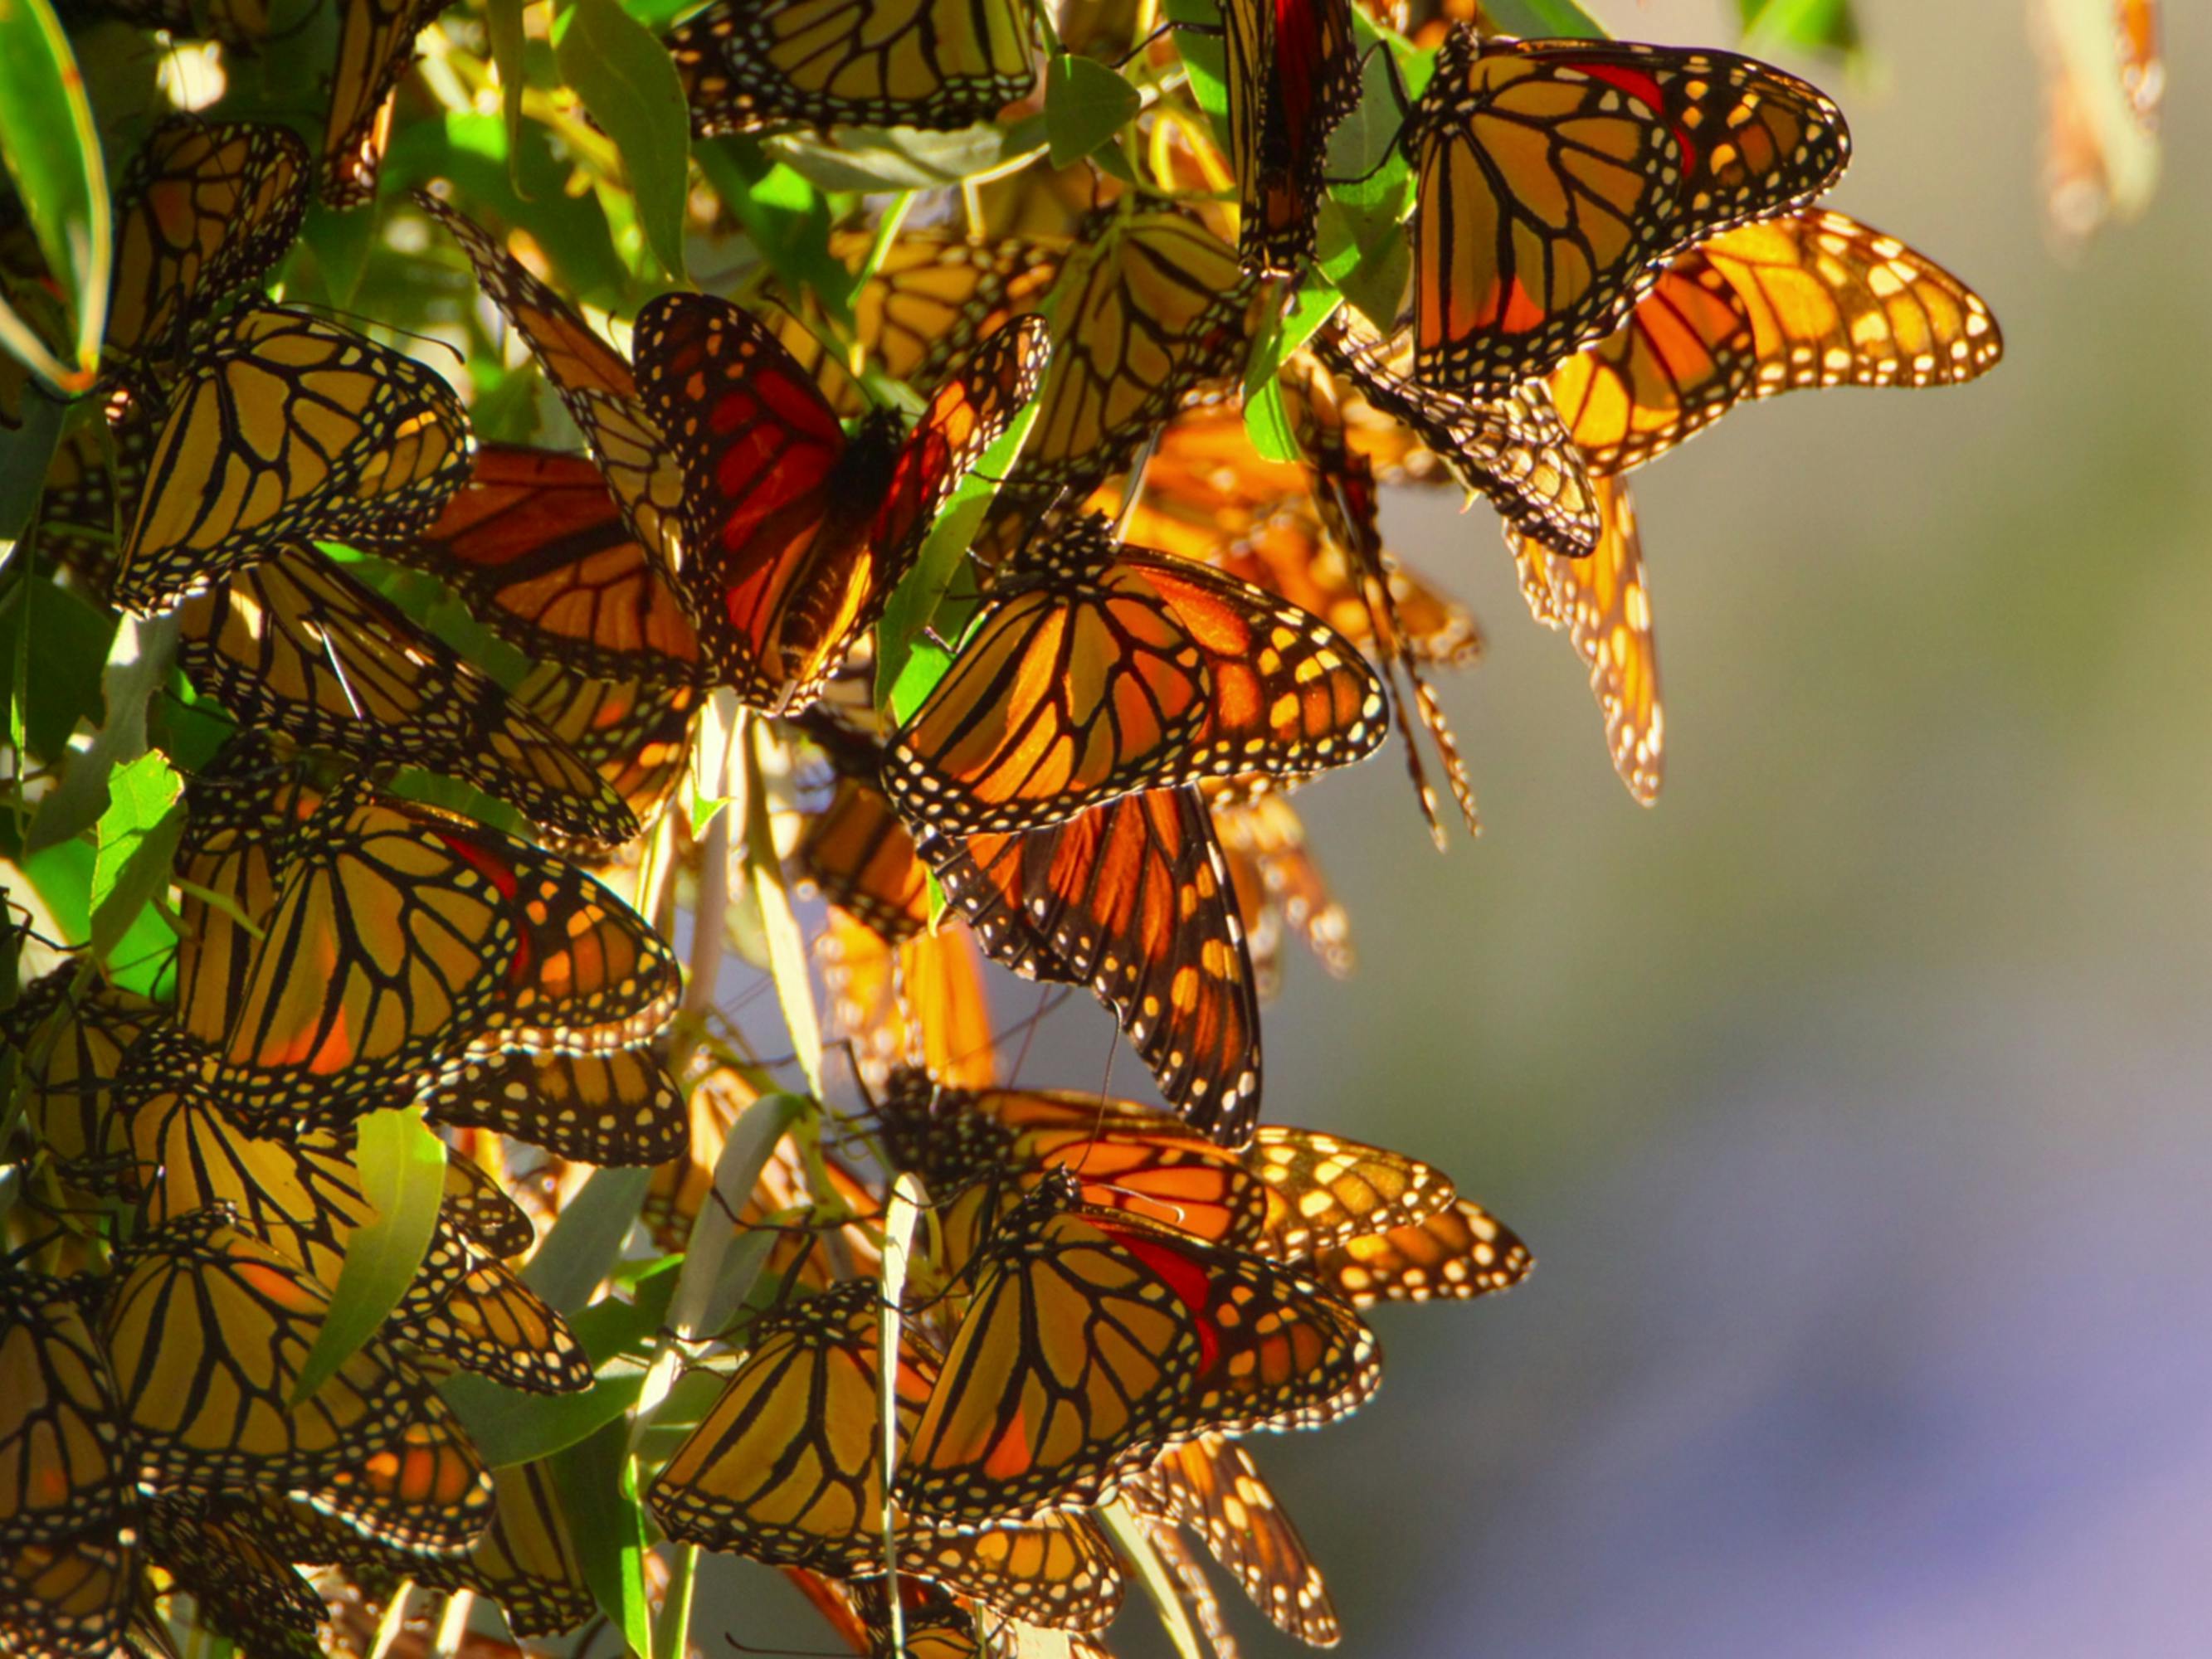 Some monarch butterflies lit up by the sun.